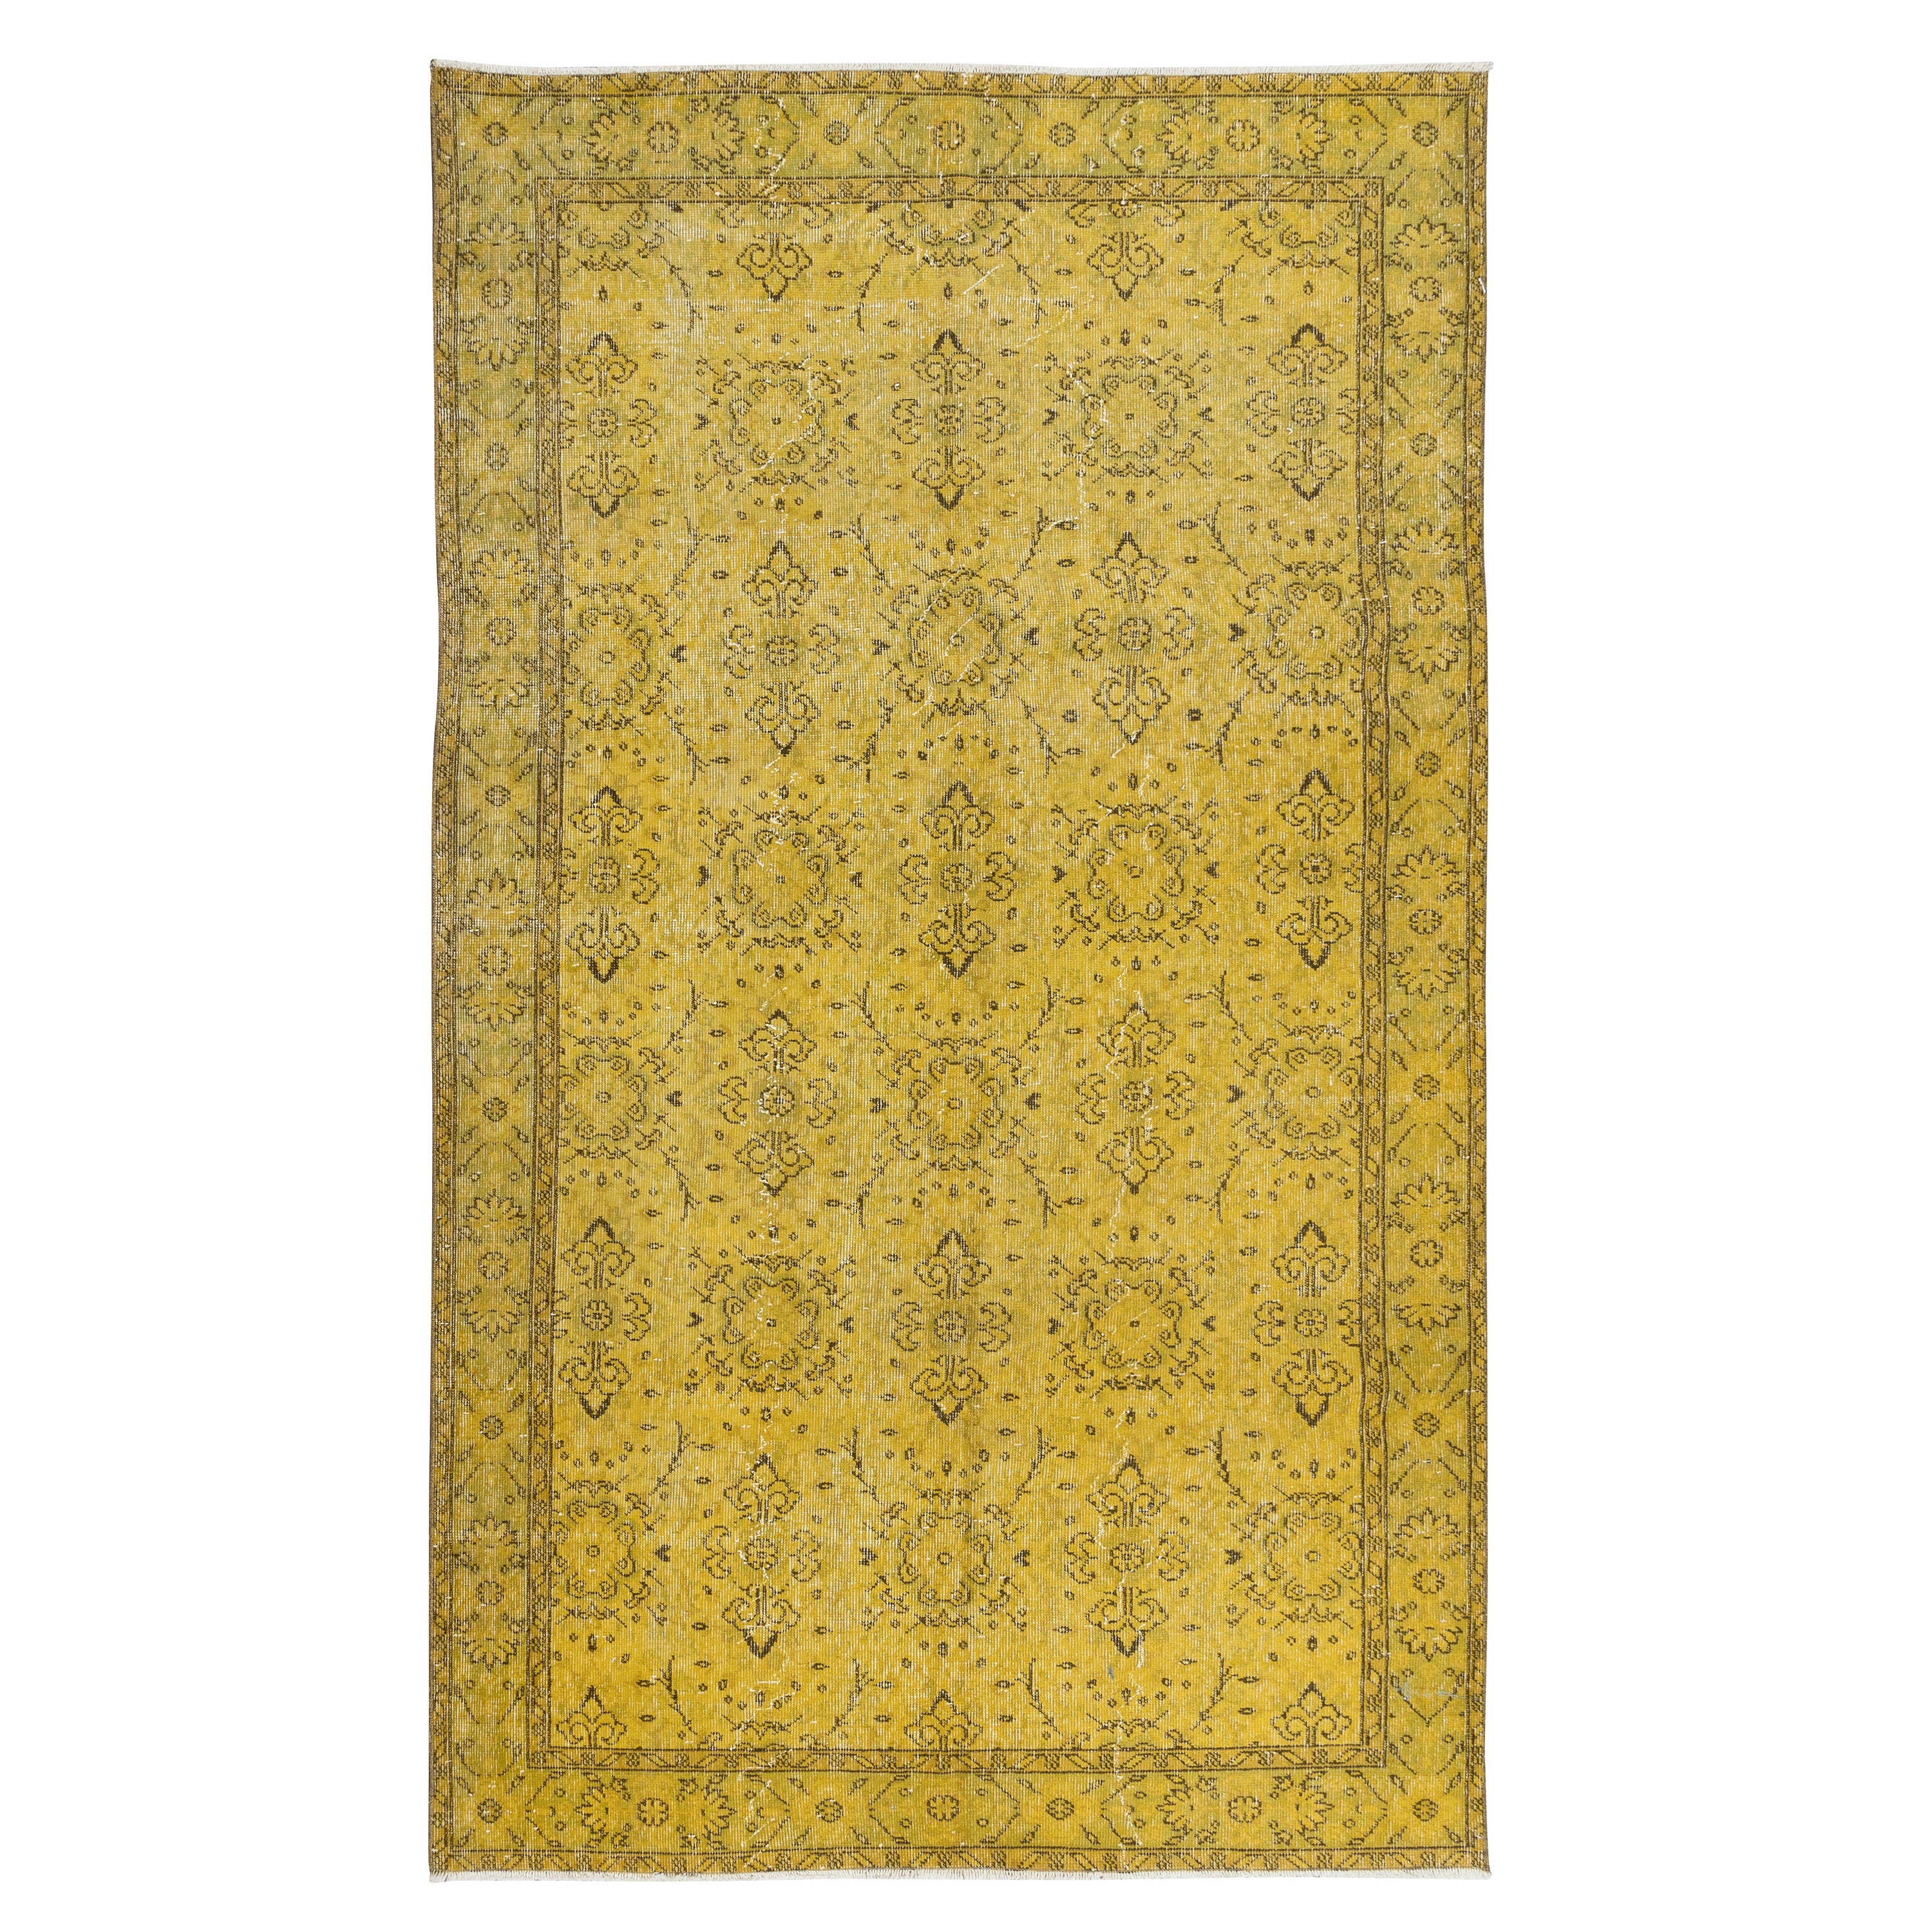 5.5x9.5 Ft Modern Handmade Floral Turkish Area Rug, Yellow Upcycled Carpet For Sale